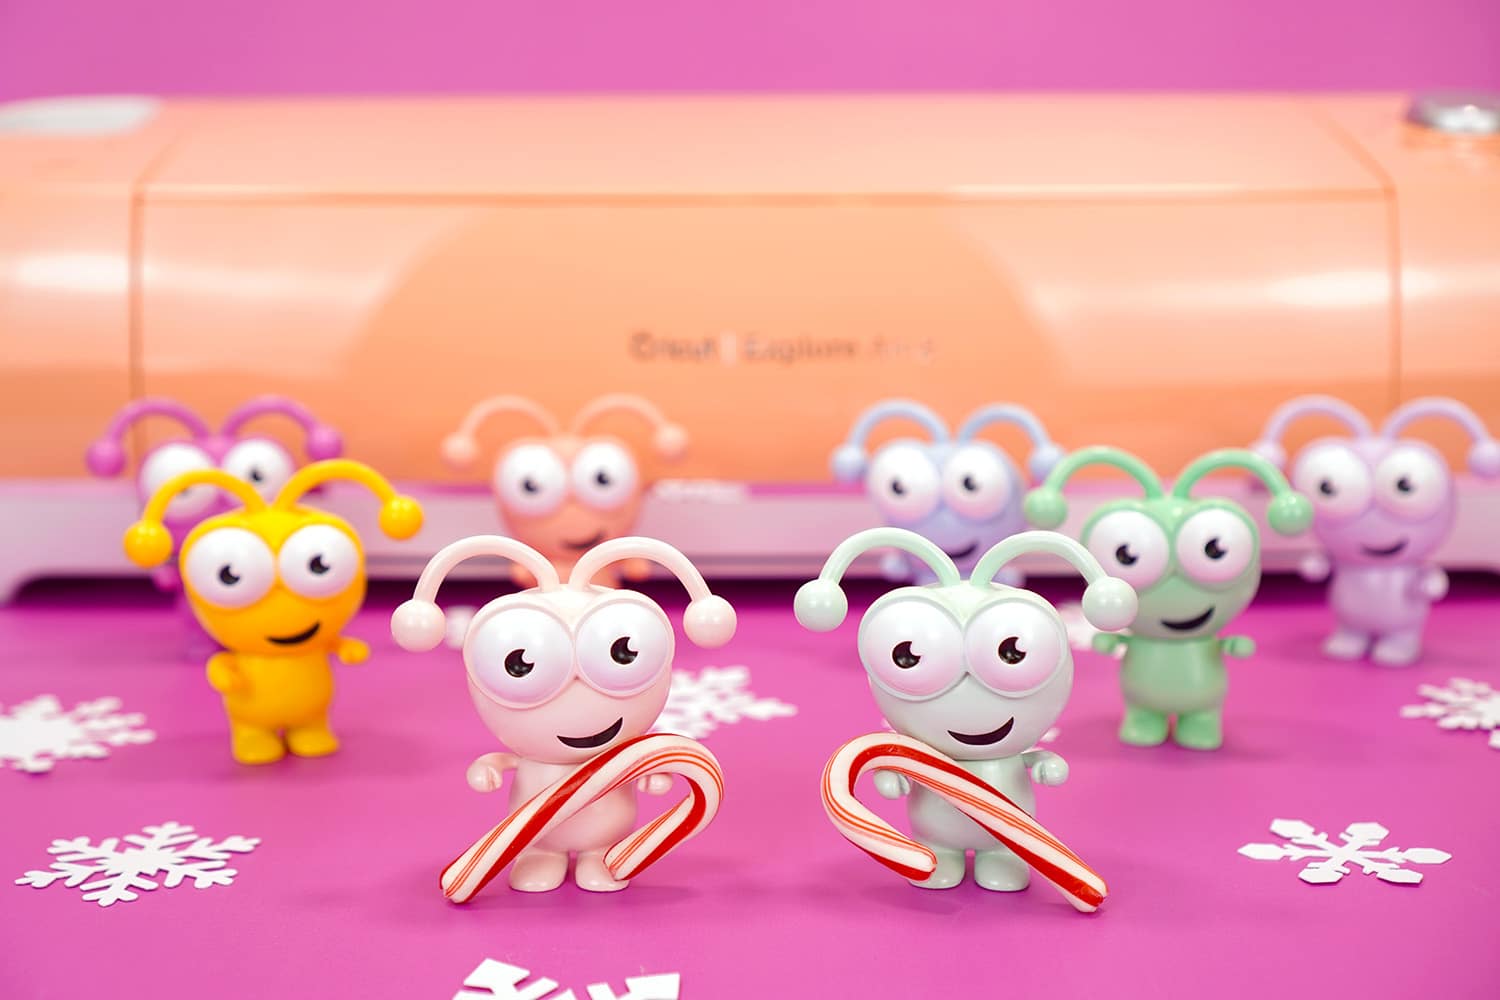 Rainbow colored Cricut Cutie figures holding candy canes on purple background with peach Cricut Explore Air 2 machine